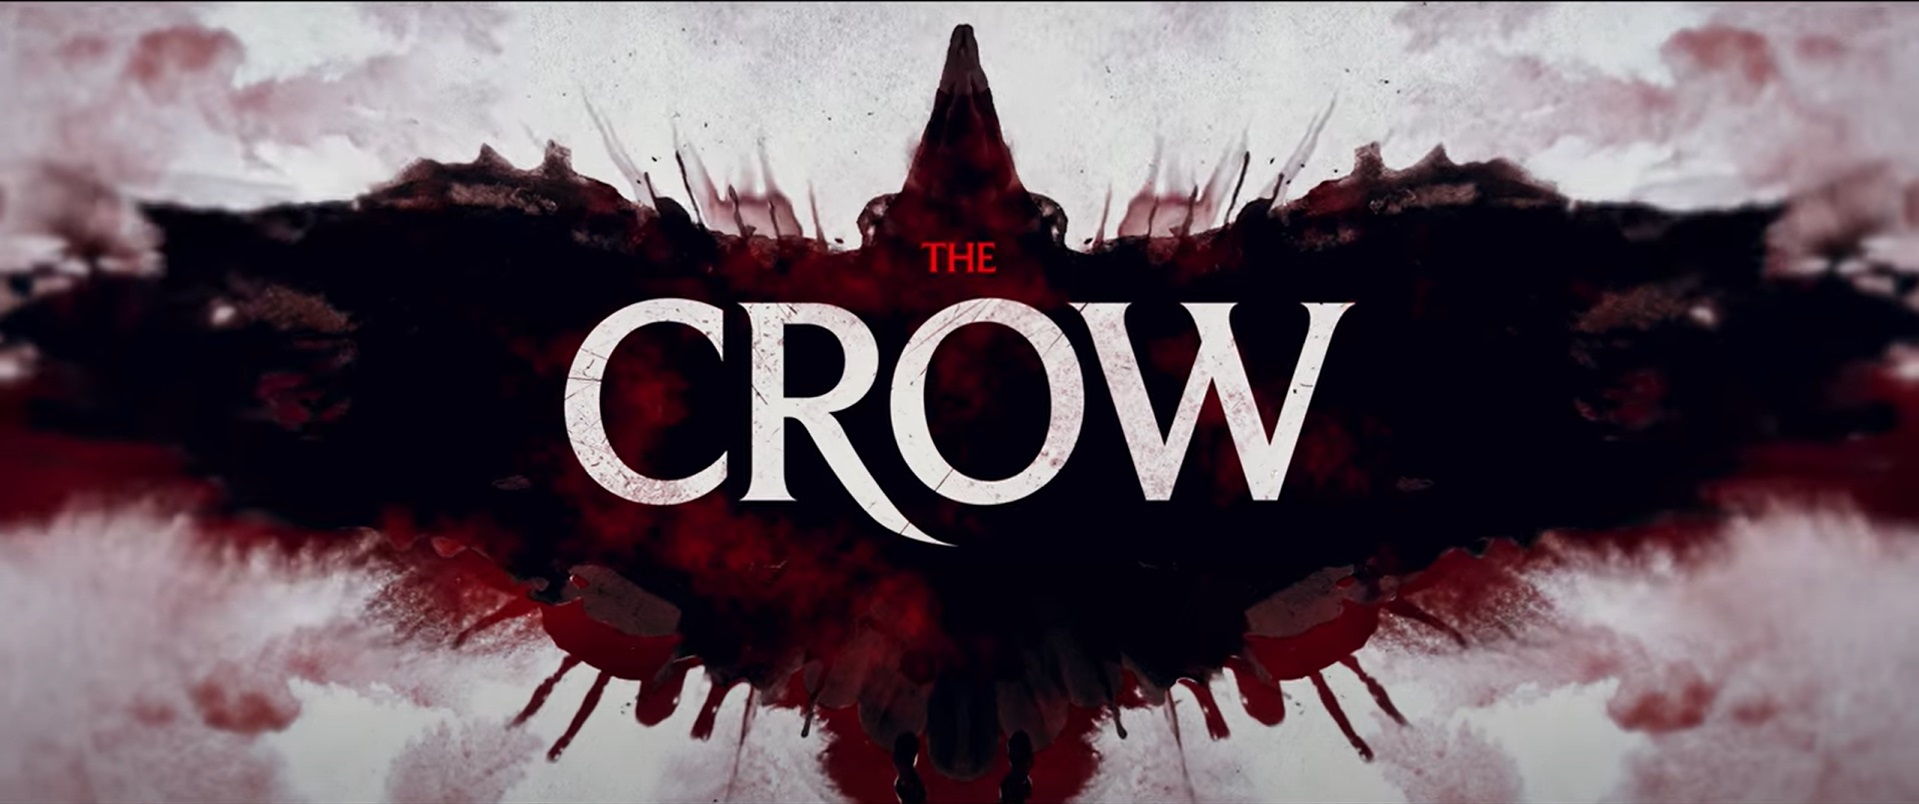 The Crow (2024) Official Trailer trailerjunction.fun